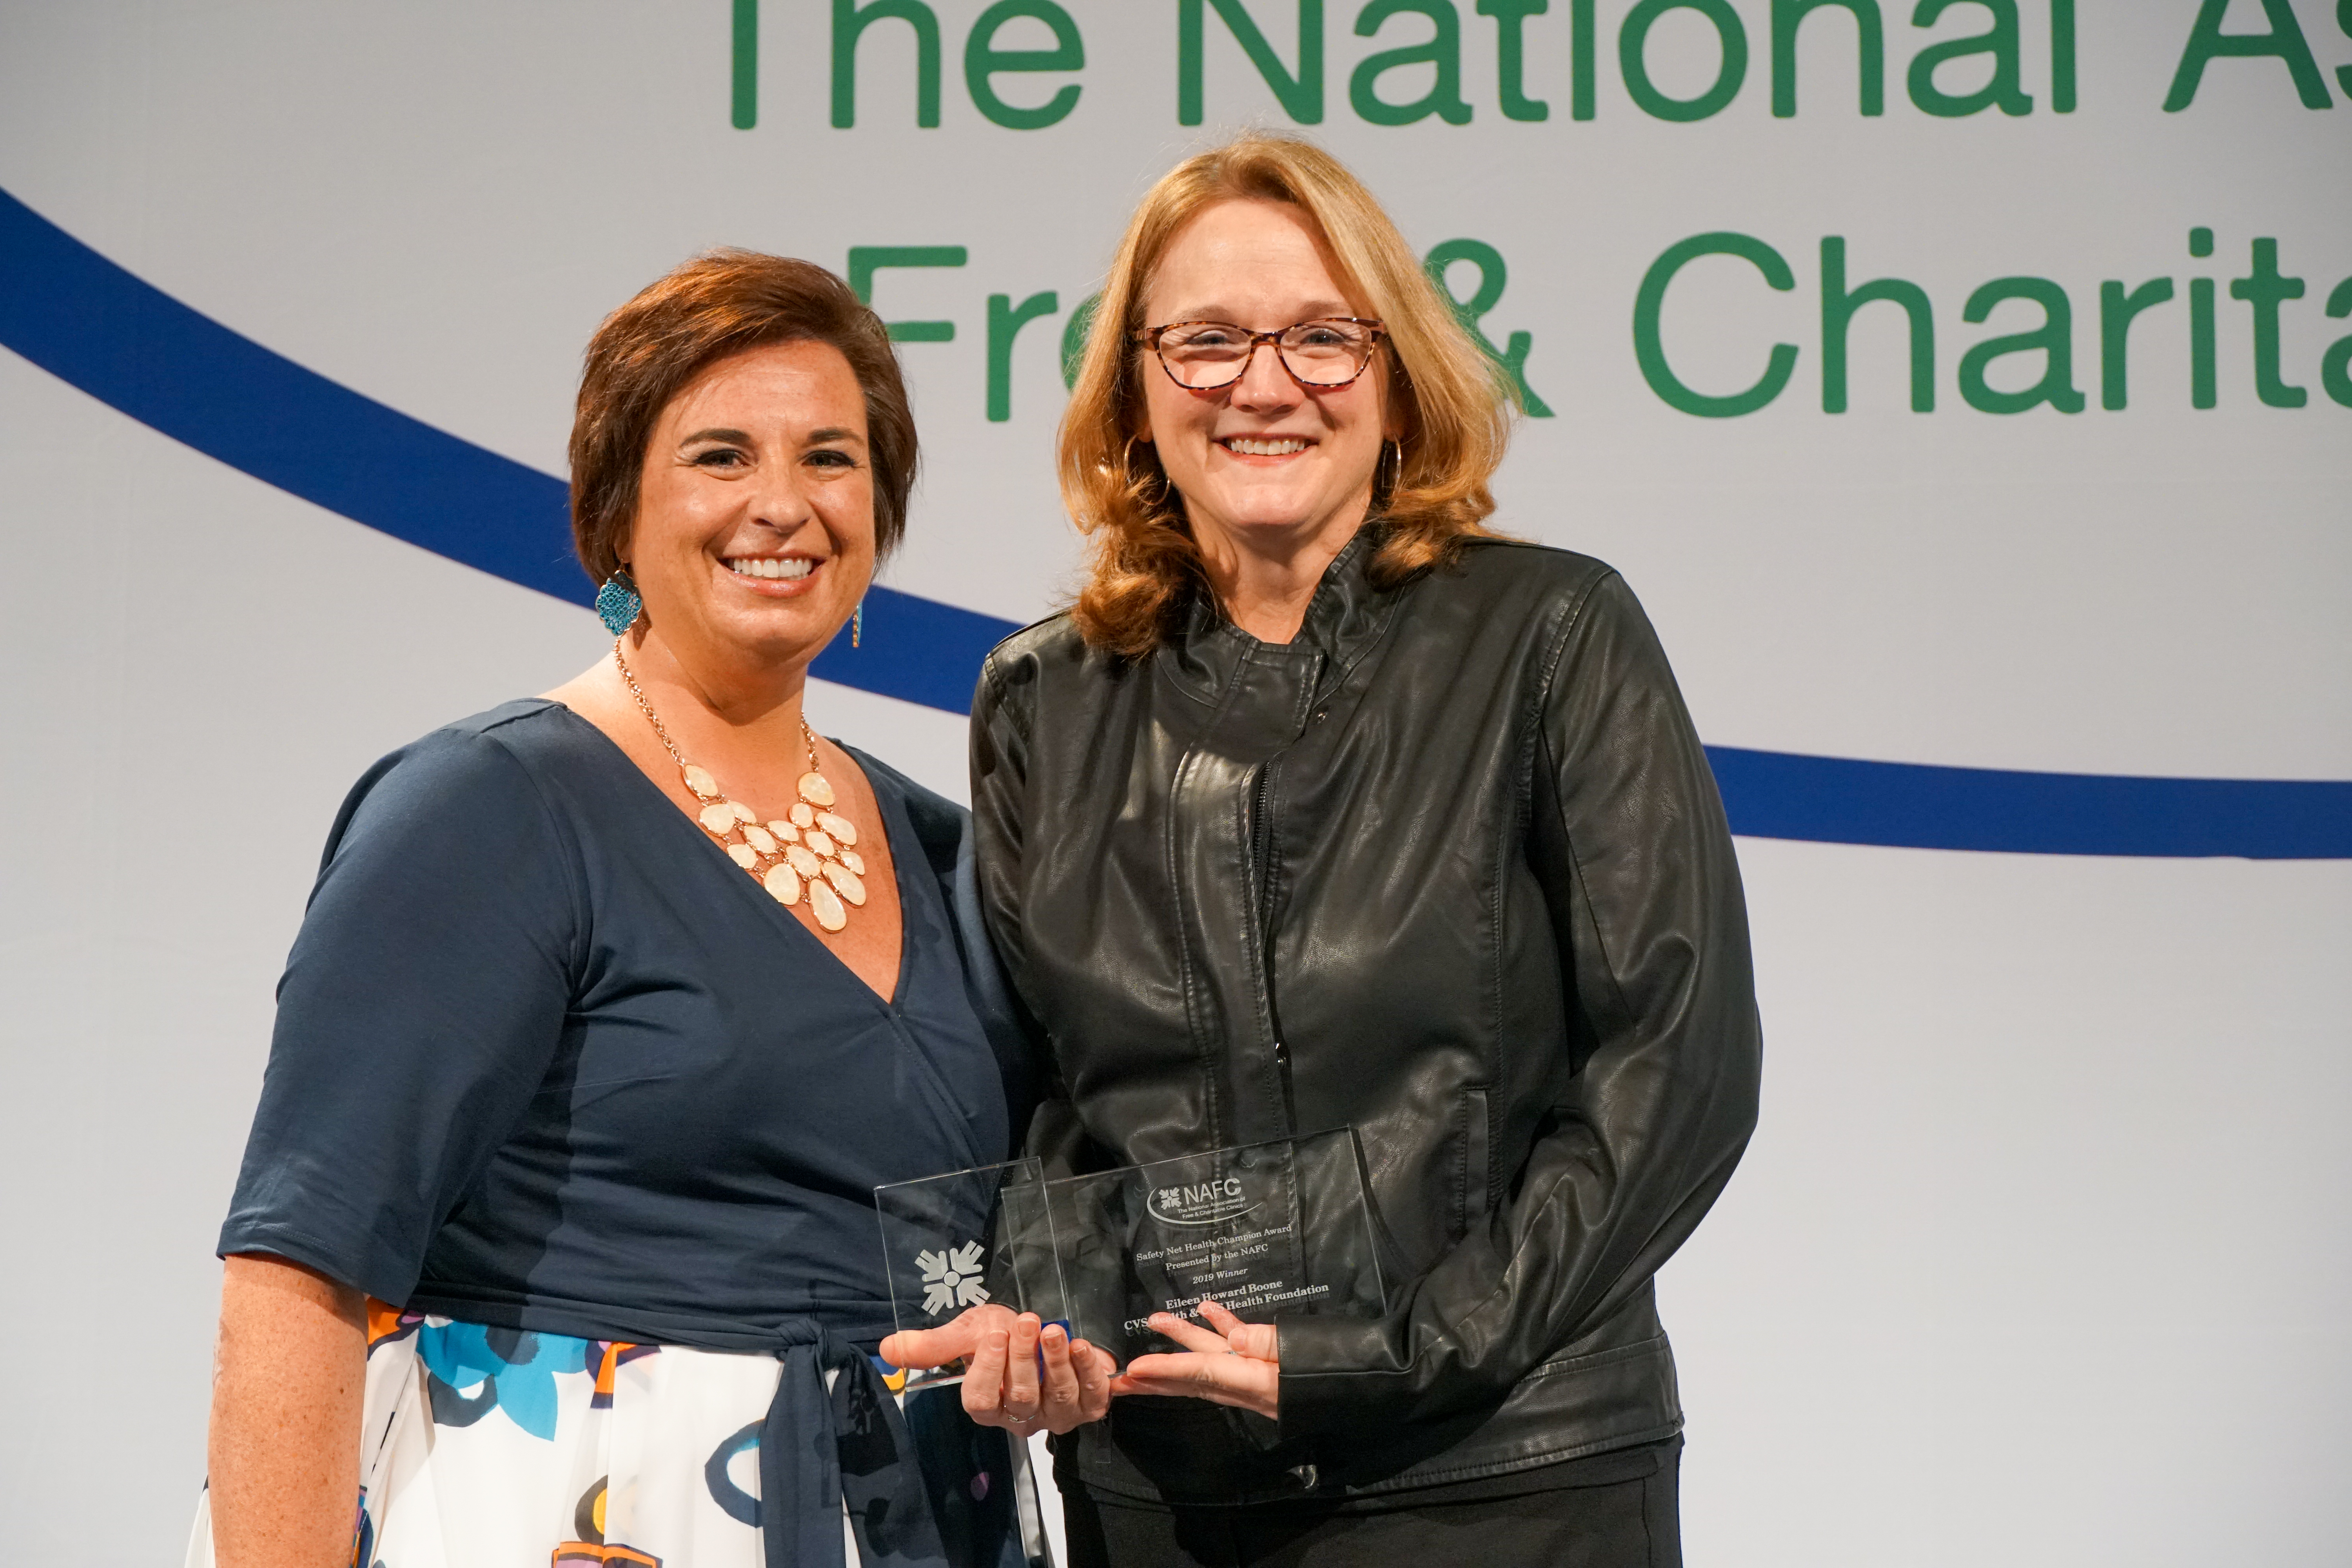 Nicole Lamoureux, NAFC President and Chief Executive Officer presents Eileen Howard Boone, Senior Vice President of Corporate Social Responsibility and Philanthropy for CVS Health and President of the CVS Health Foundation with the NAFC 2019 Safety Net Health Care Champion Award.